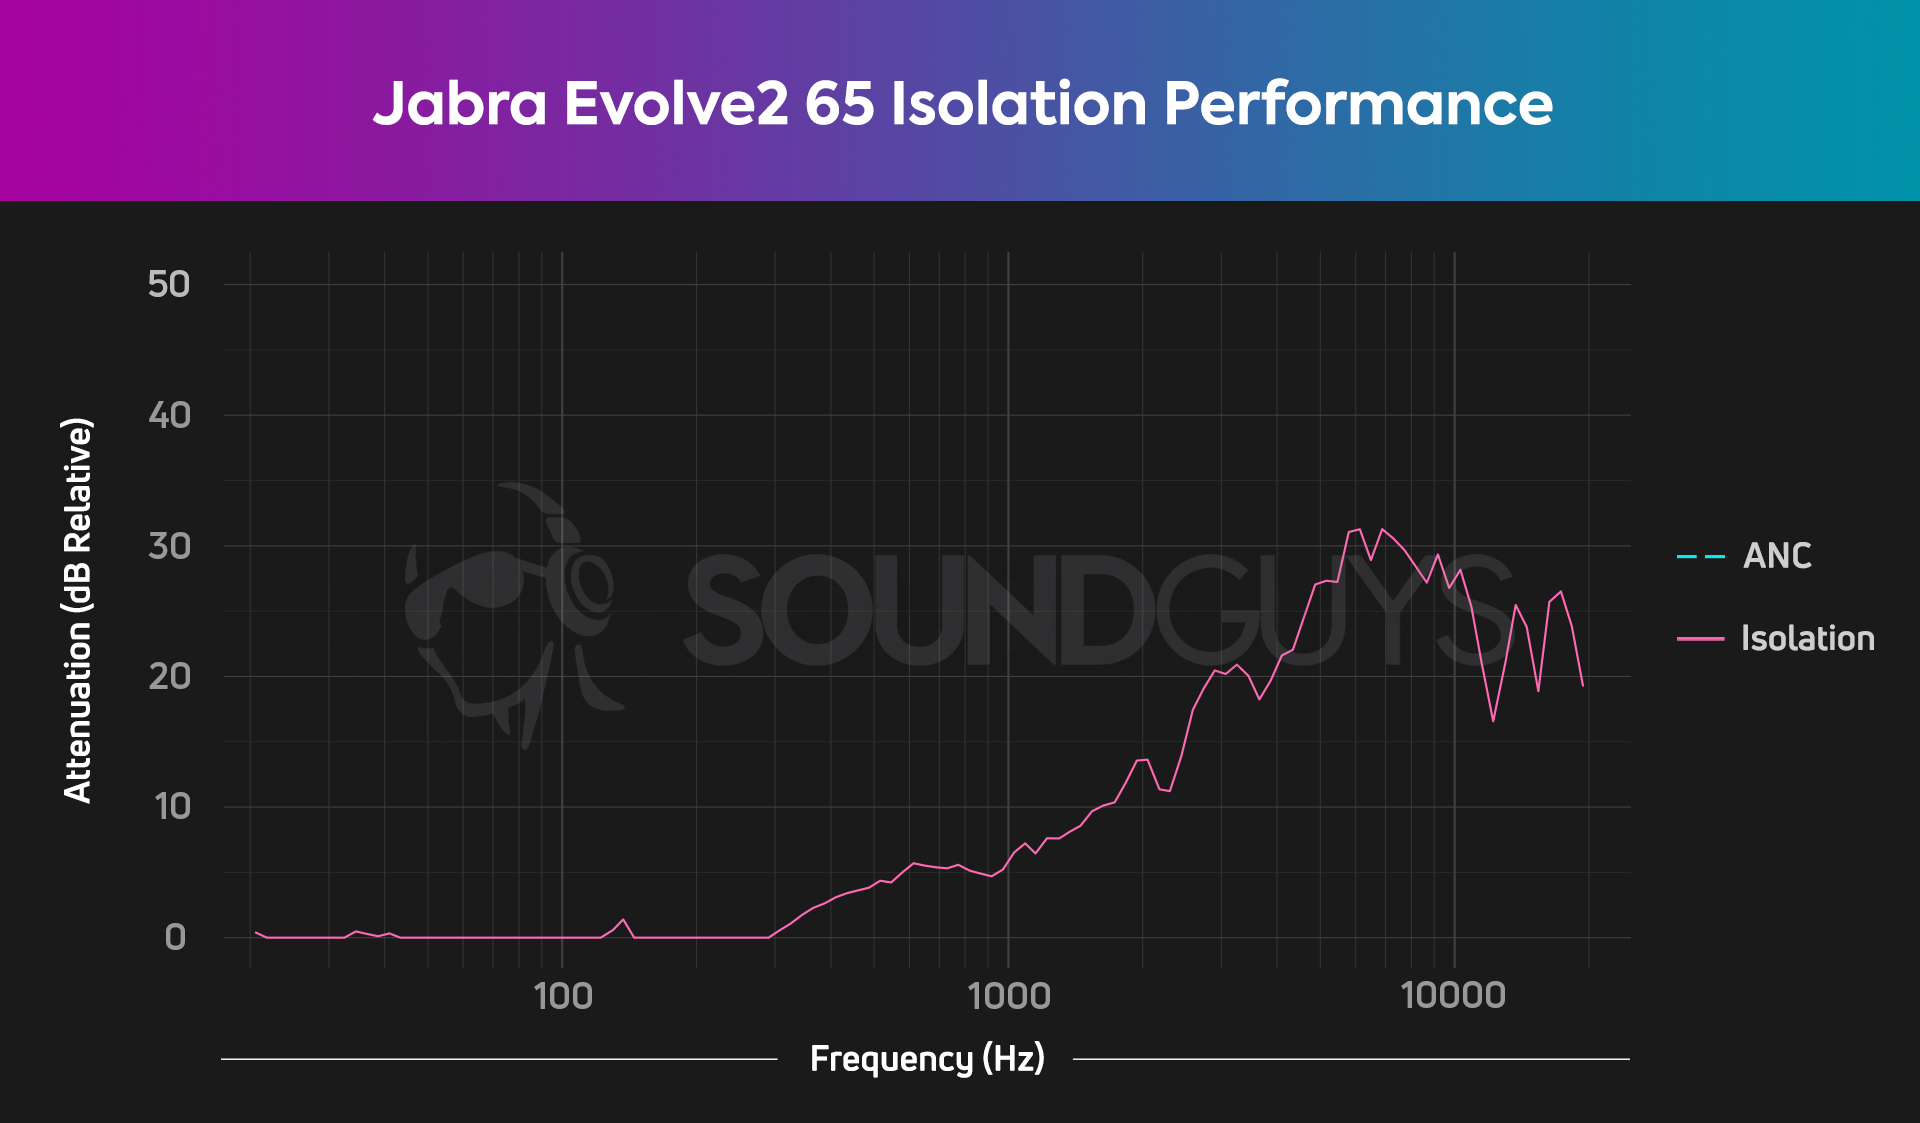 The Jabra Evolve2 65 isolation chart showing generally midling performance, with only the high end having some attenuation.